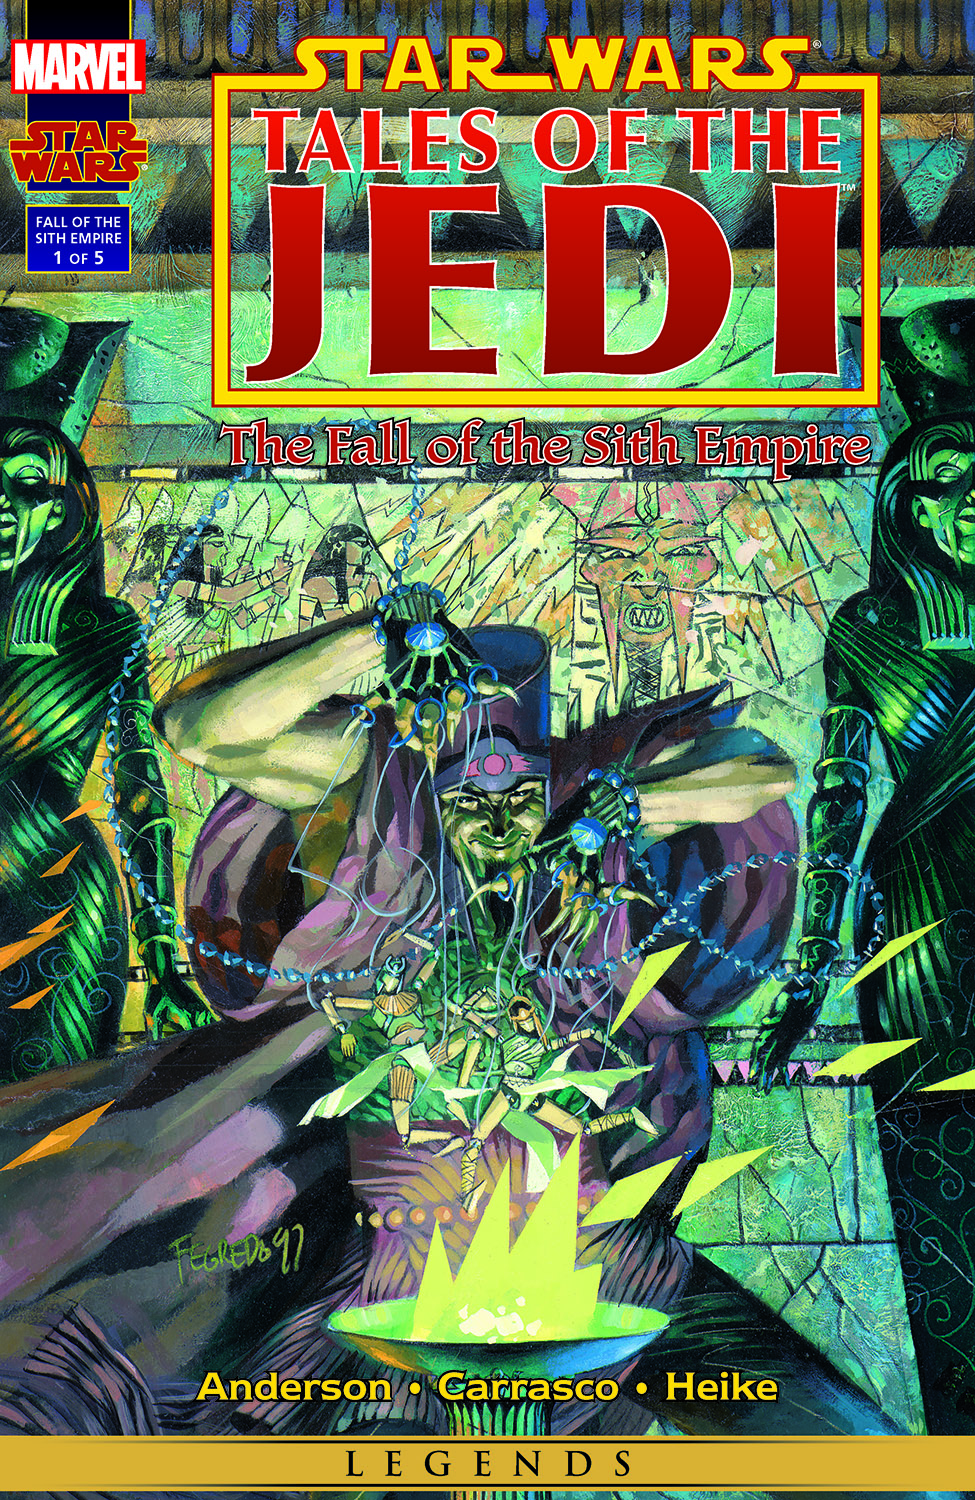 Star Wars: Tales of the Jedi - The Fall of the Sith Empire (1997) #1